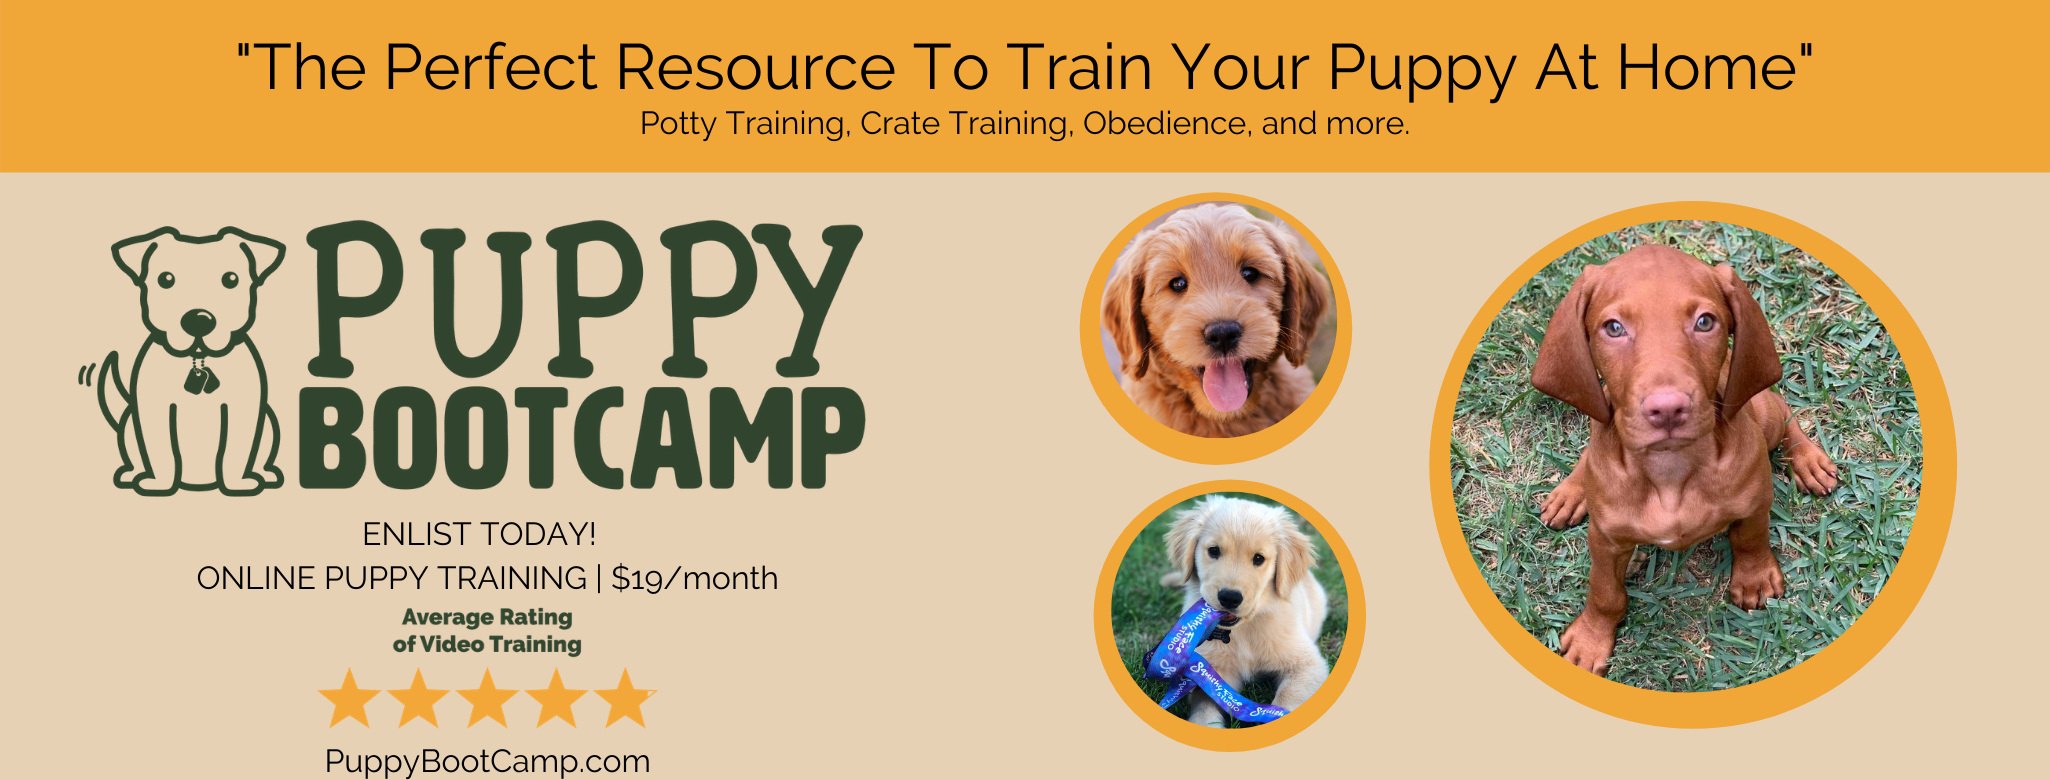 Puppy potty training for real dog lovers - I Live UpI Live Up